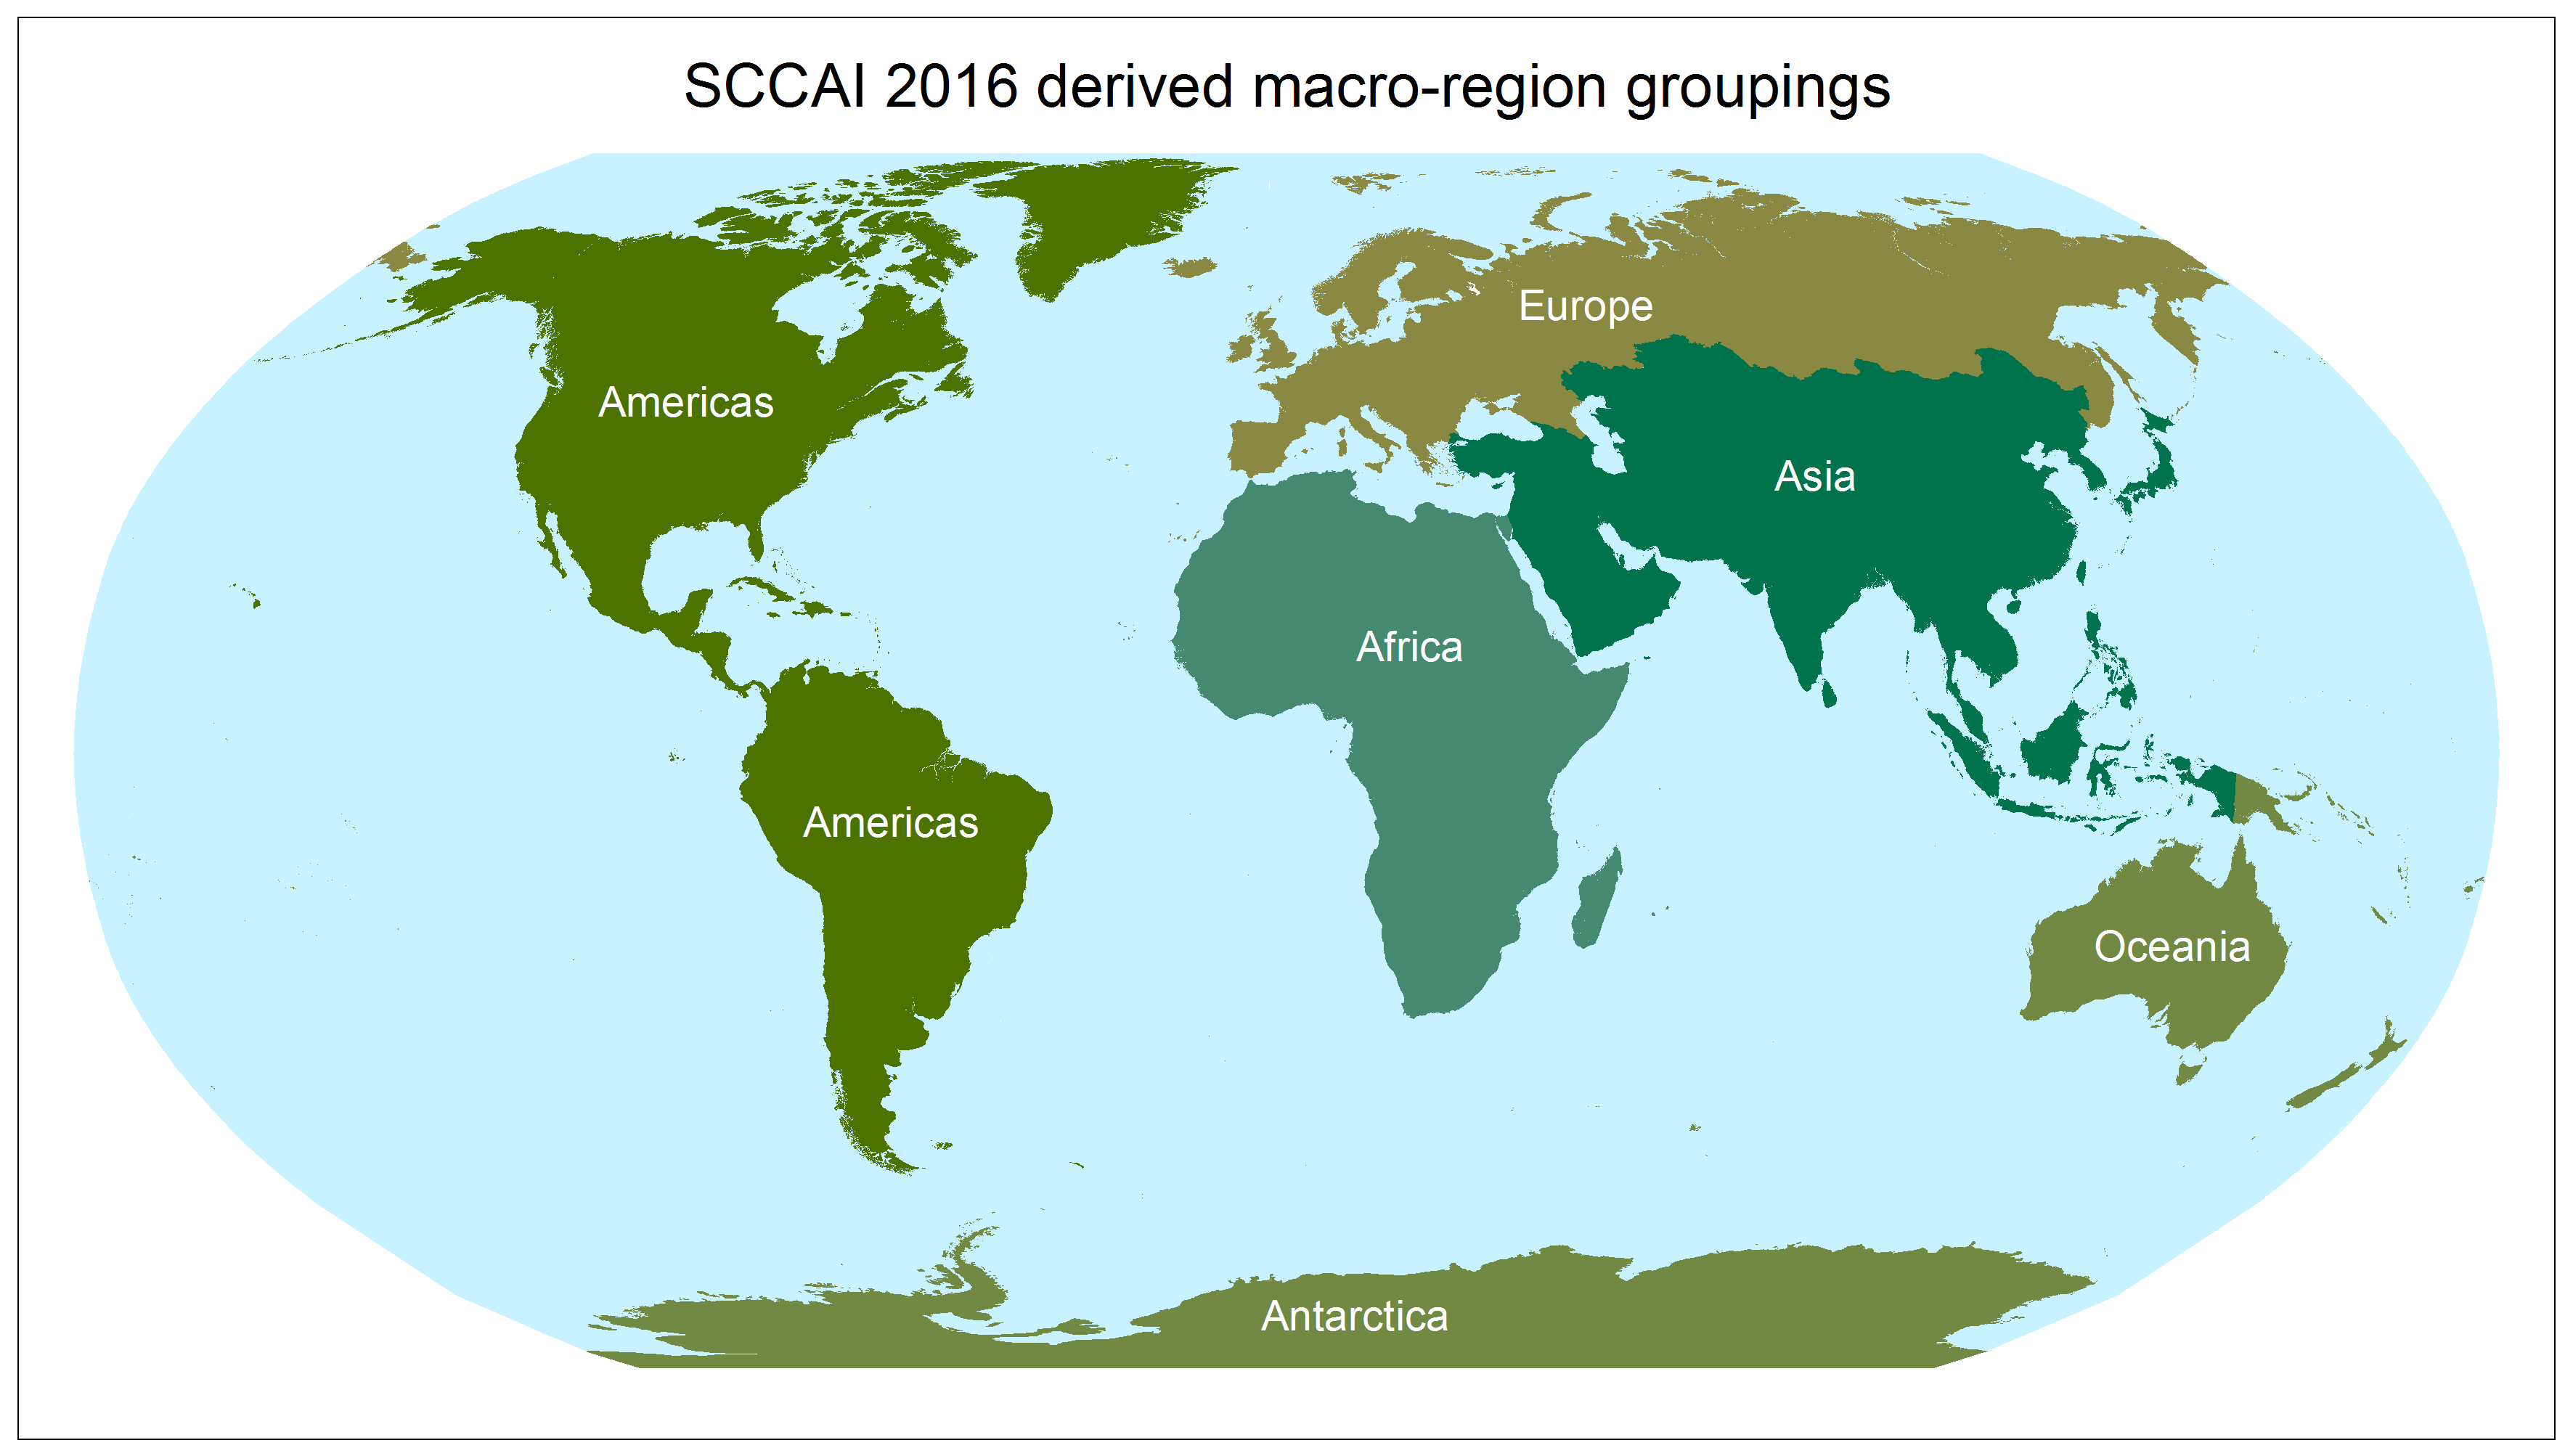 Map 1 SCCAI 2016 derived macro-region groupings